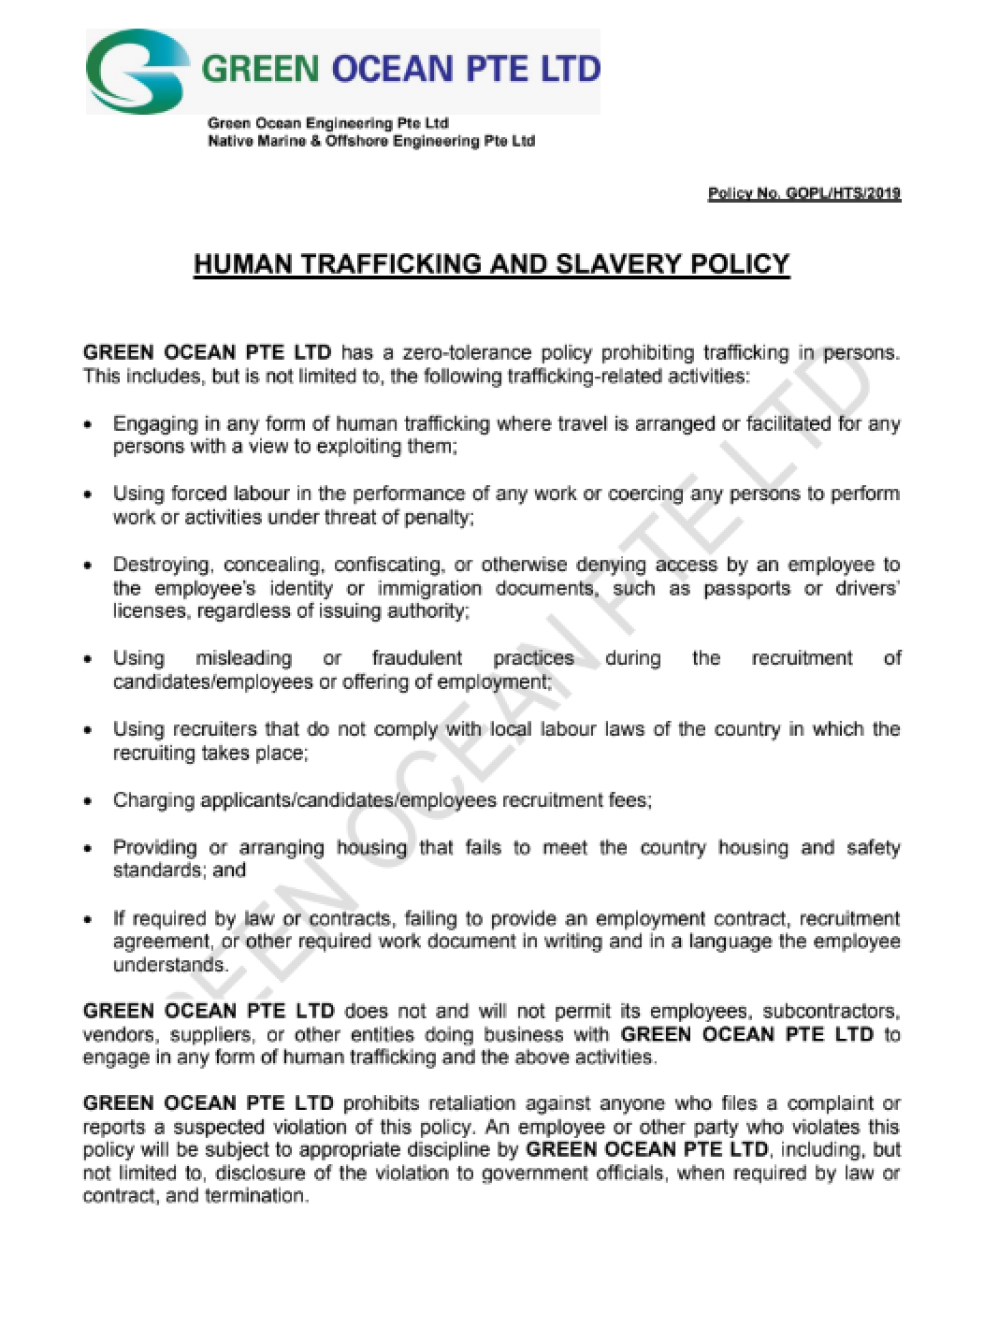 HUMAN TRAFFICKING AND SLAVERY POLICY